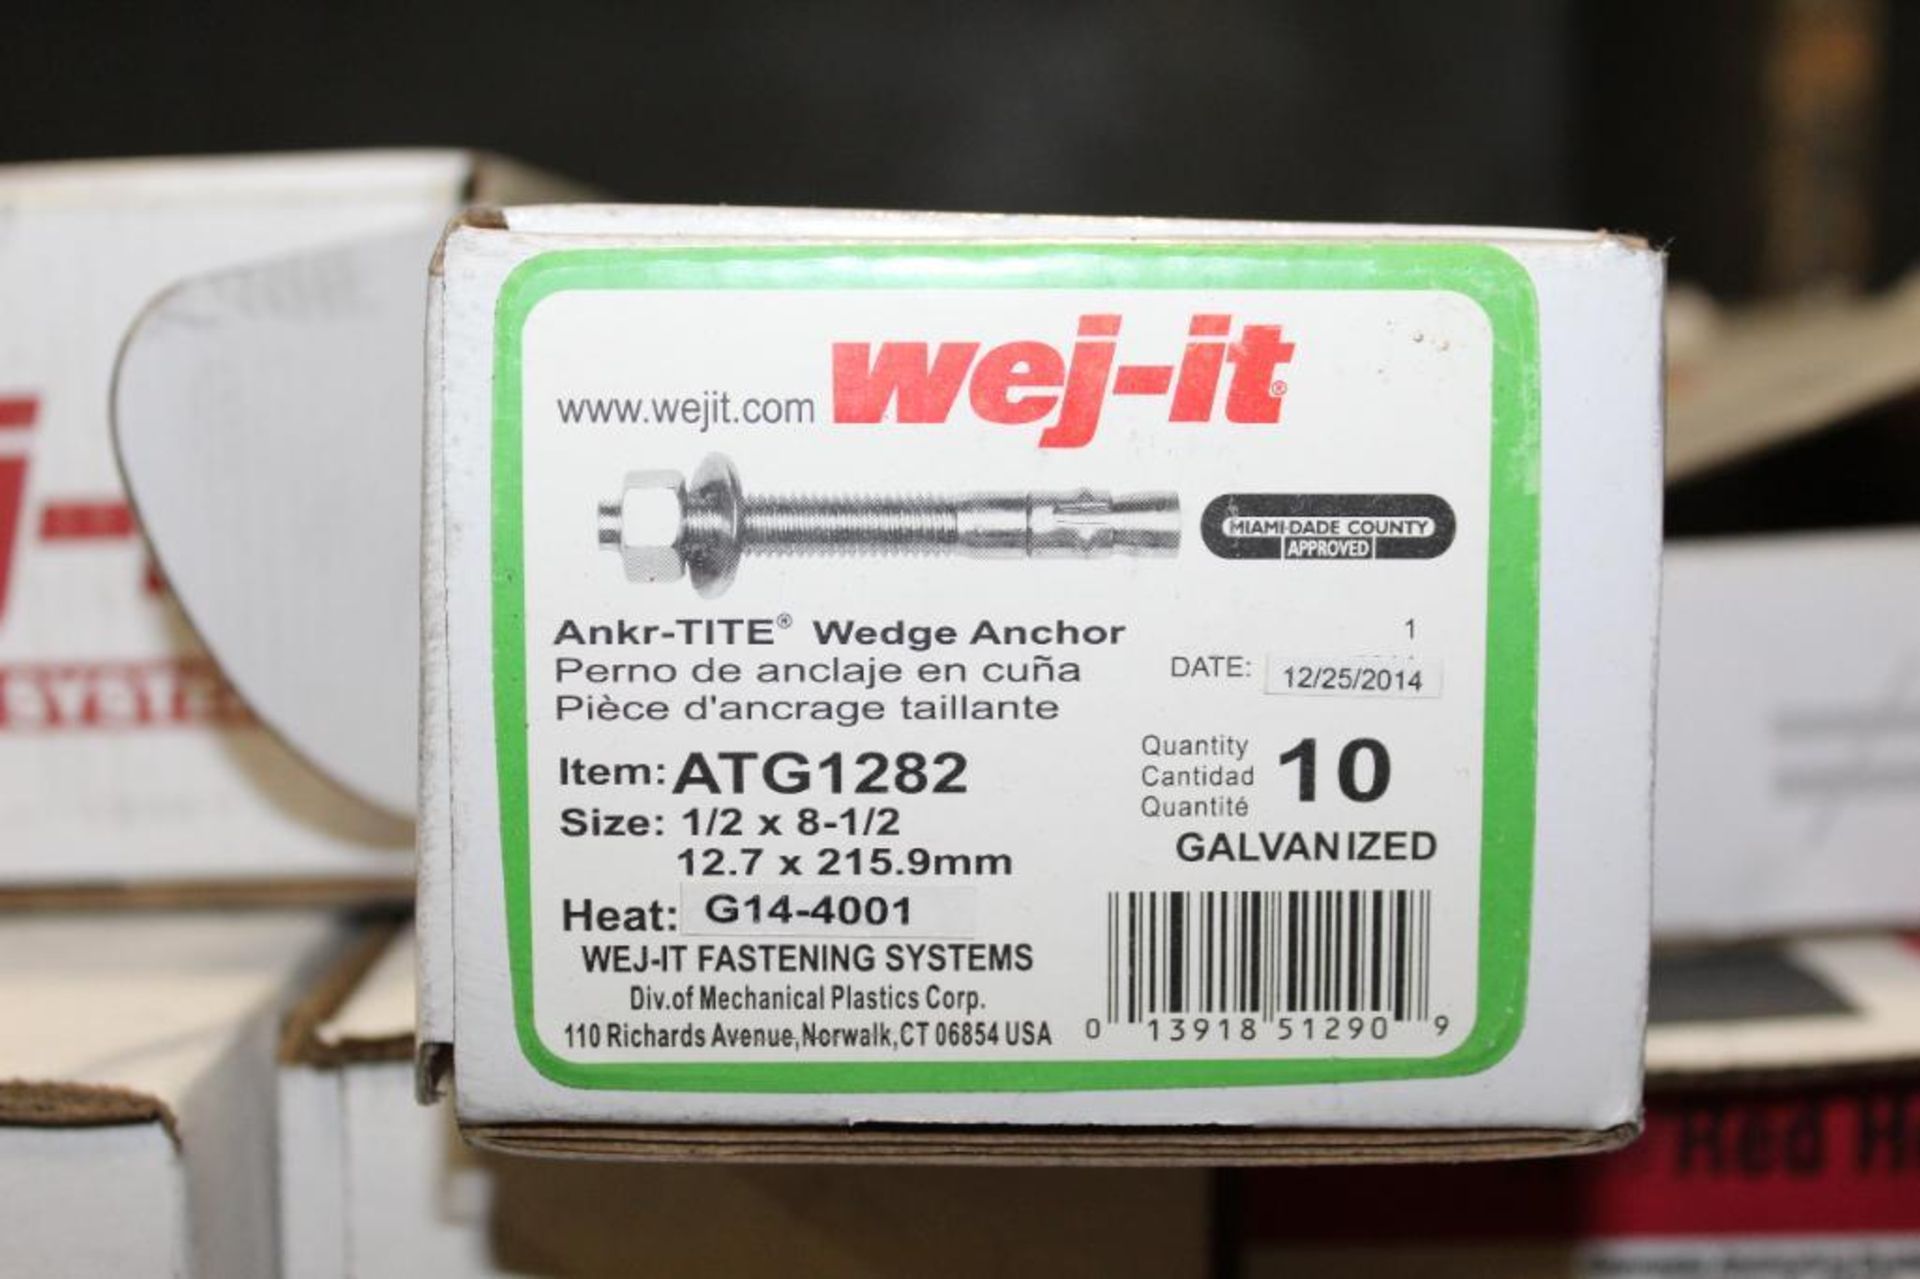 Lot of Wej-it Fasteners System - Image 4 of 6